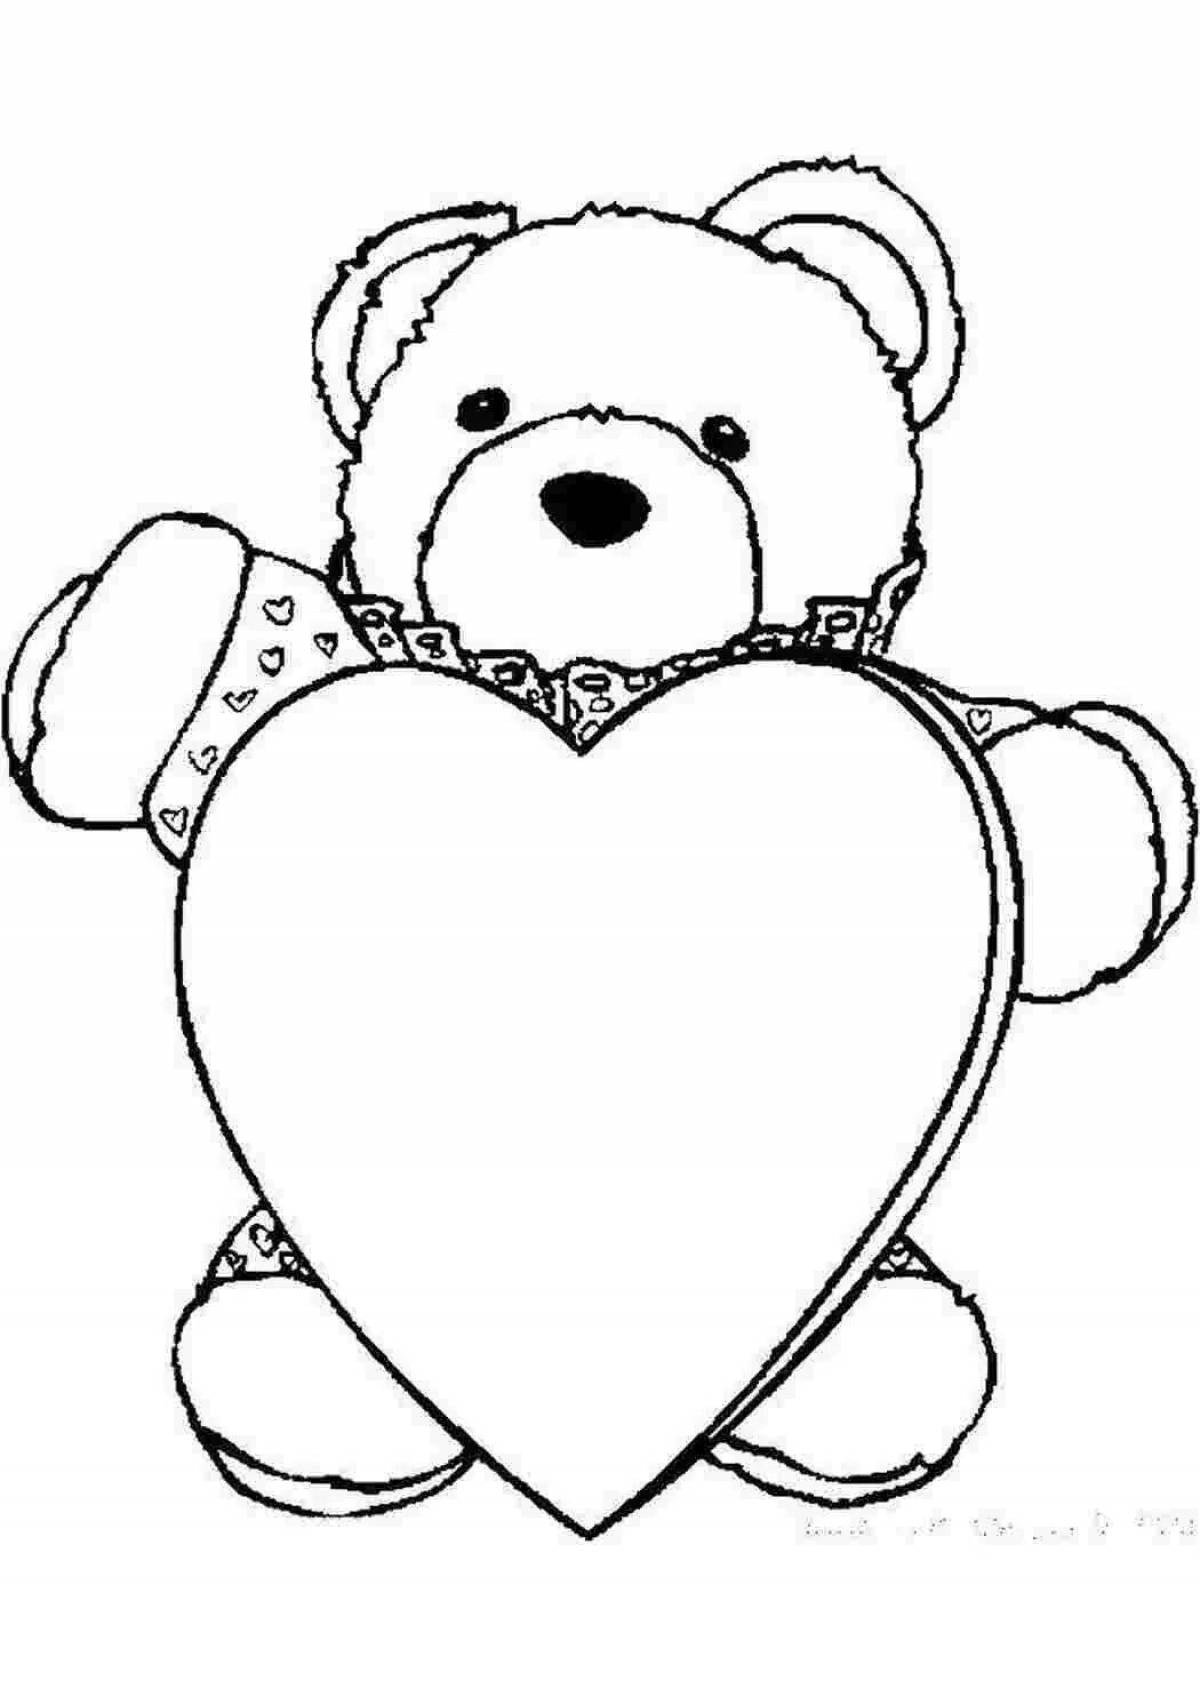 Coloring teddy bear with a heart